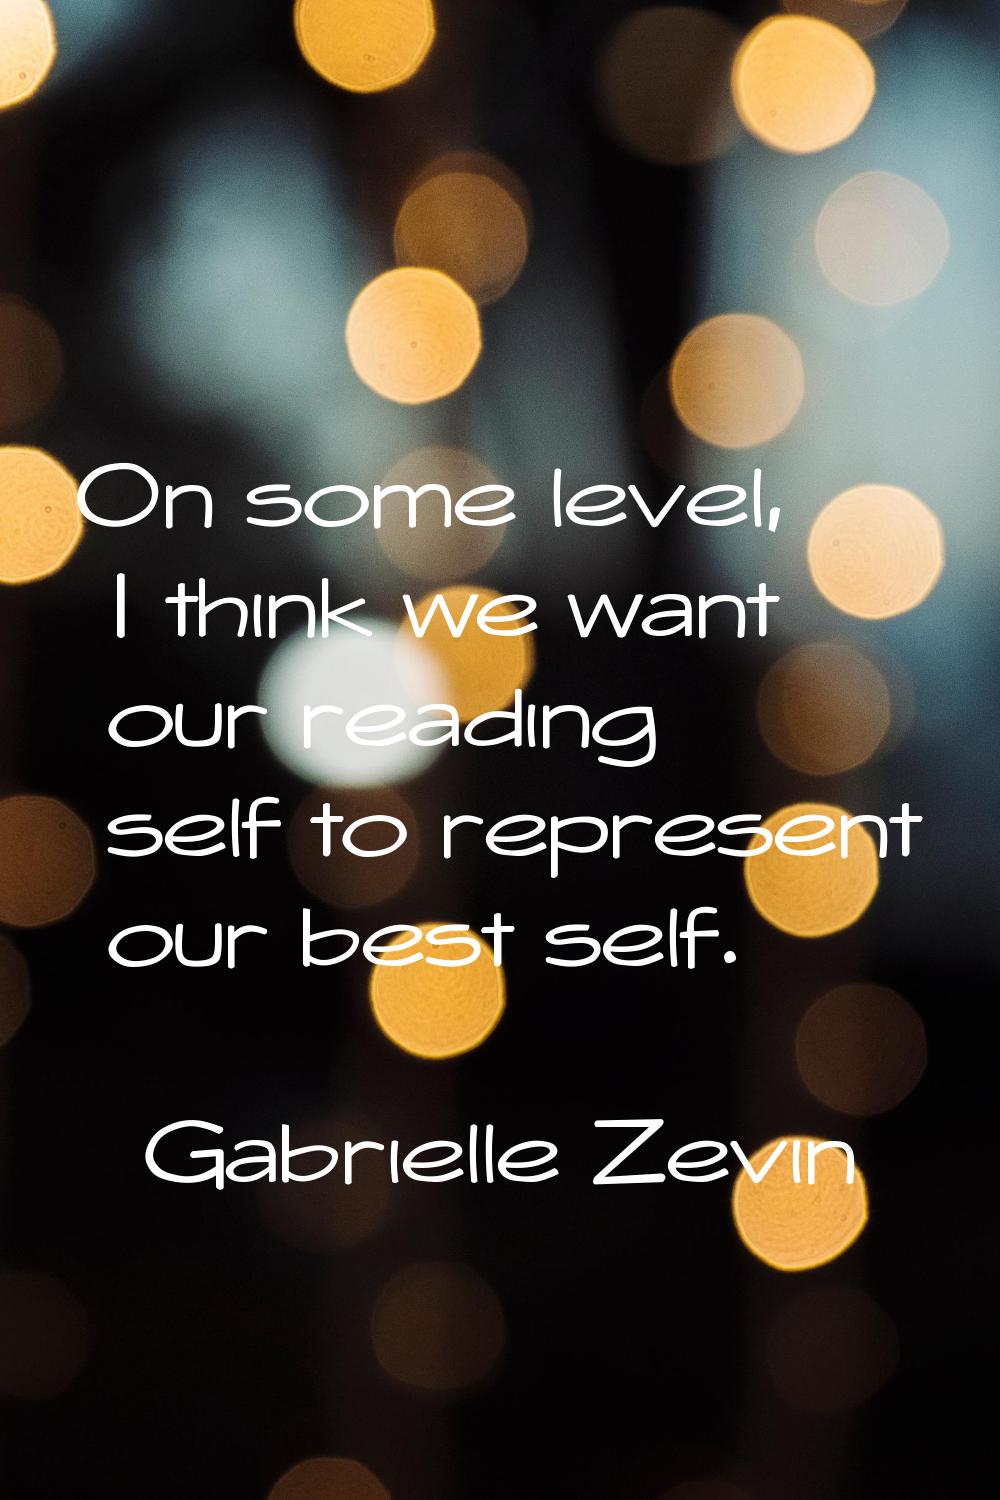 On some level, I think we want our reading self to represent our best self.